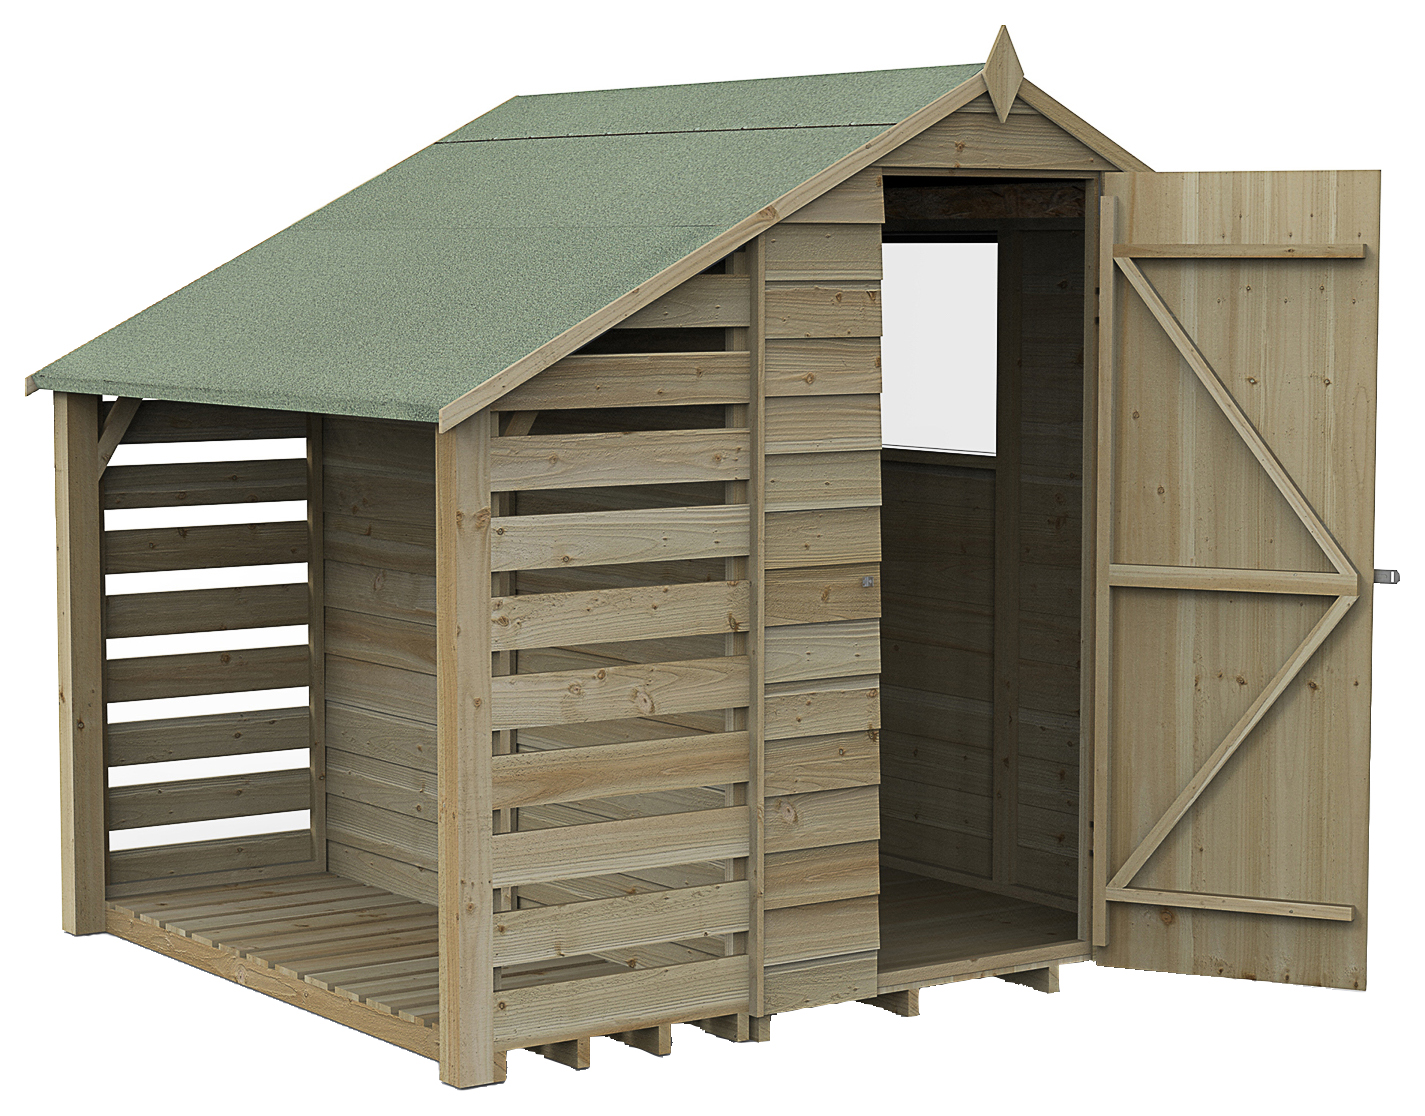 Image of Forest Garden 6 x 4ft 4Life Apex Overlap Pressure Treated Windowless Shed with Lean-To